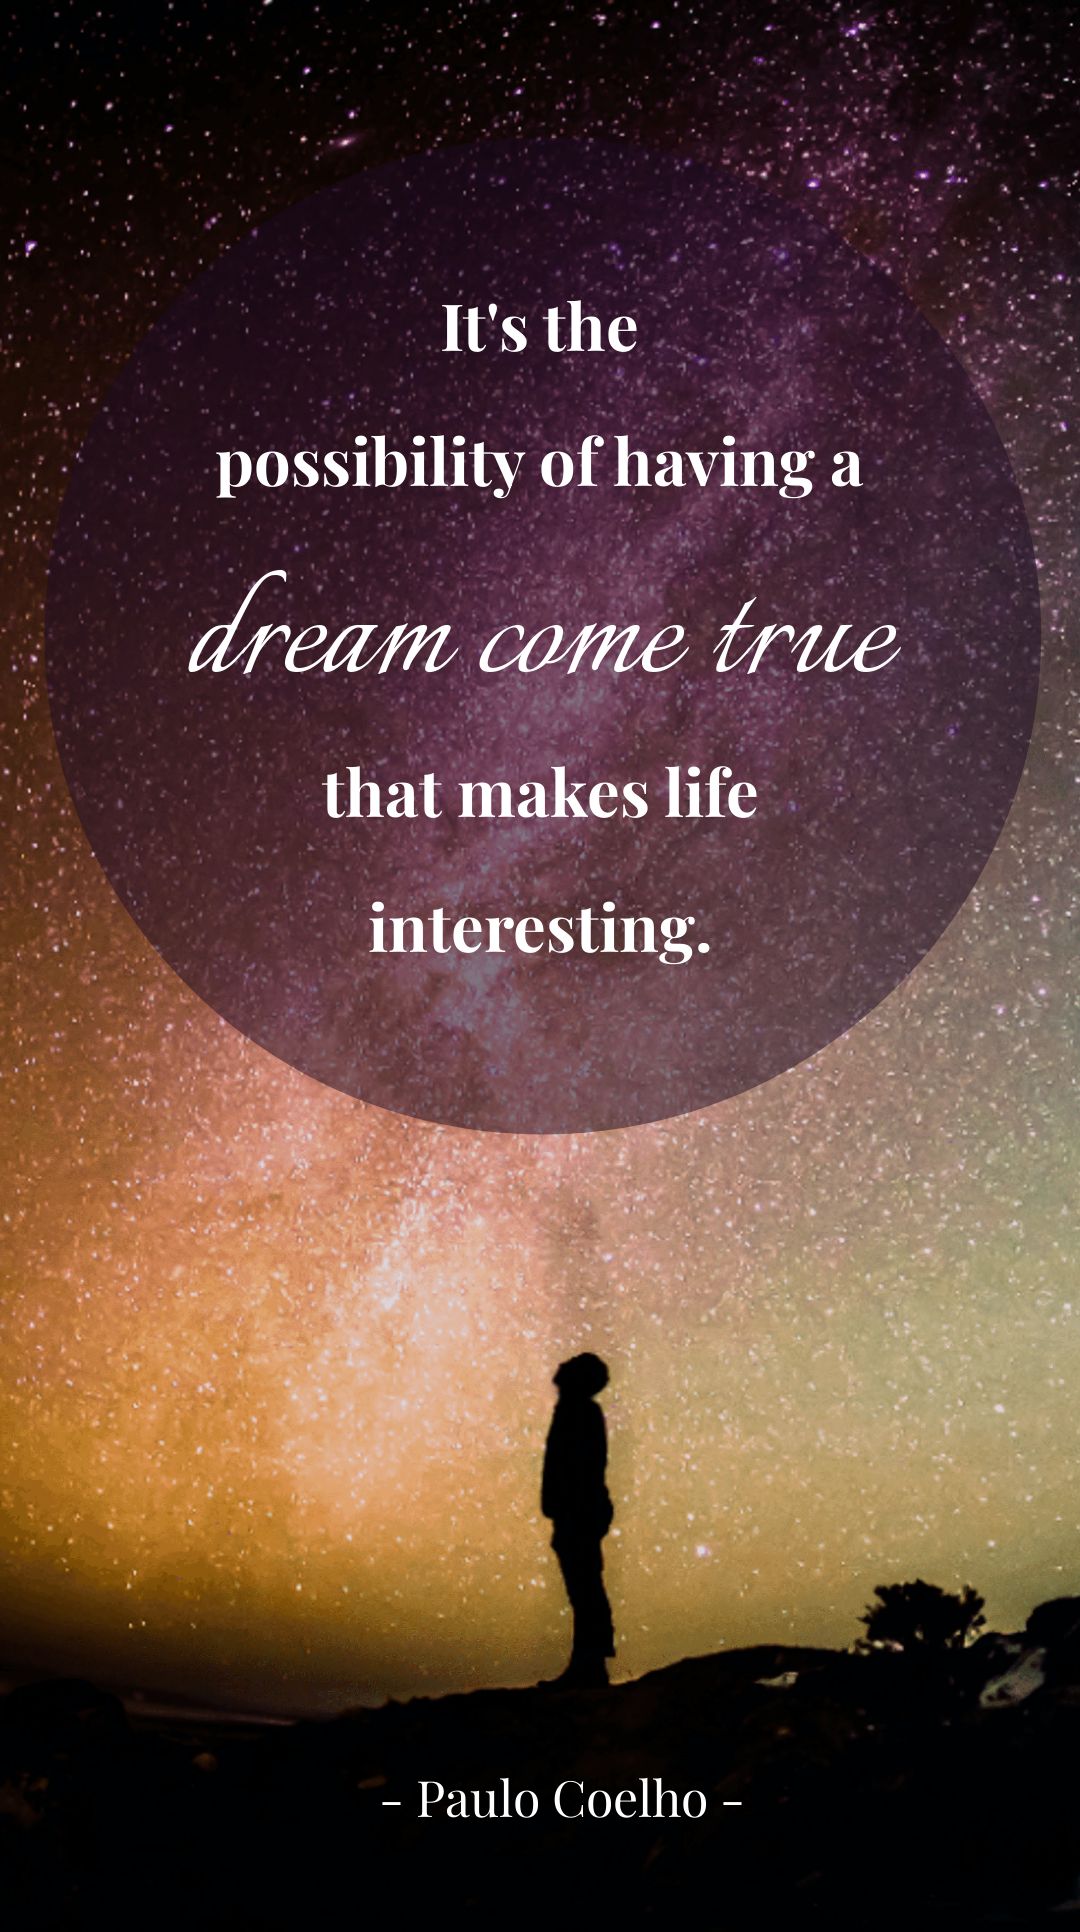 Paulo Coelho - It's the possibility of having a dream come true that makes life interesting.